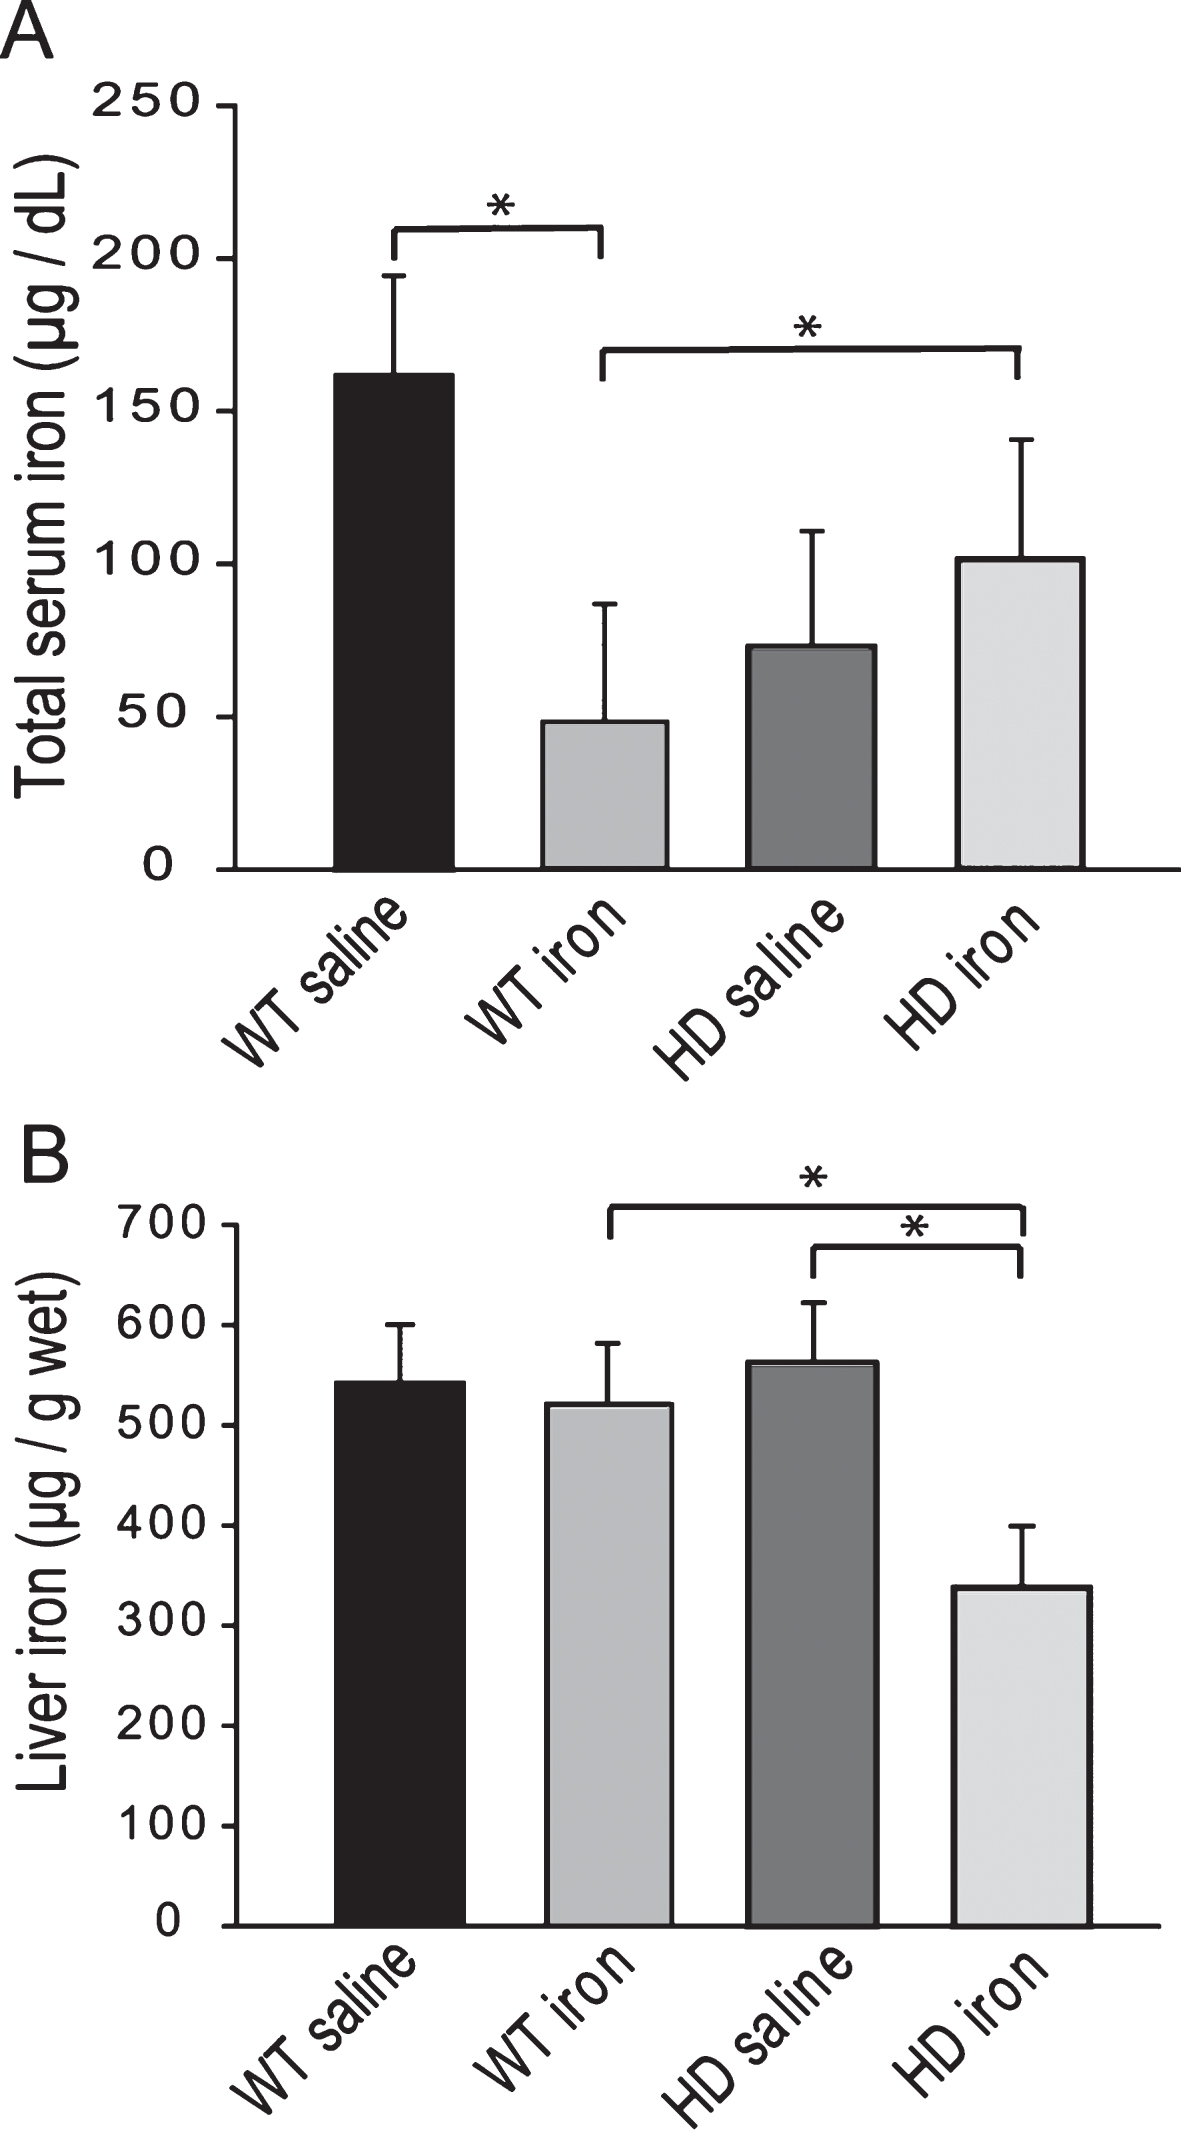 YAC128 HD mice have an altered peripheral response to neonatal iron supplementation. Mice were supplemented at 10–17 days and sacrificed at 1-year of age. A. Neonatal iron supplementation results in decreased serum iron at 1-year of age in wild-type but not YAC128 HD mice. n = 8–10, B. Iron-supplemented YAC128 HD, but not wild-type mice have significantly decreased liver iron at 1-year of age. P-value: *p < 0.05, n = 12–13.